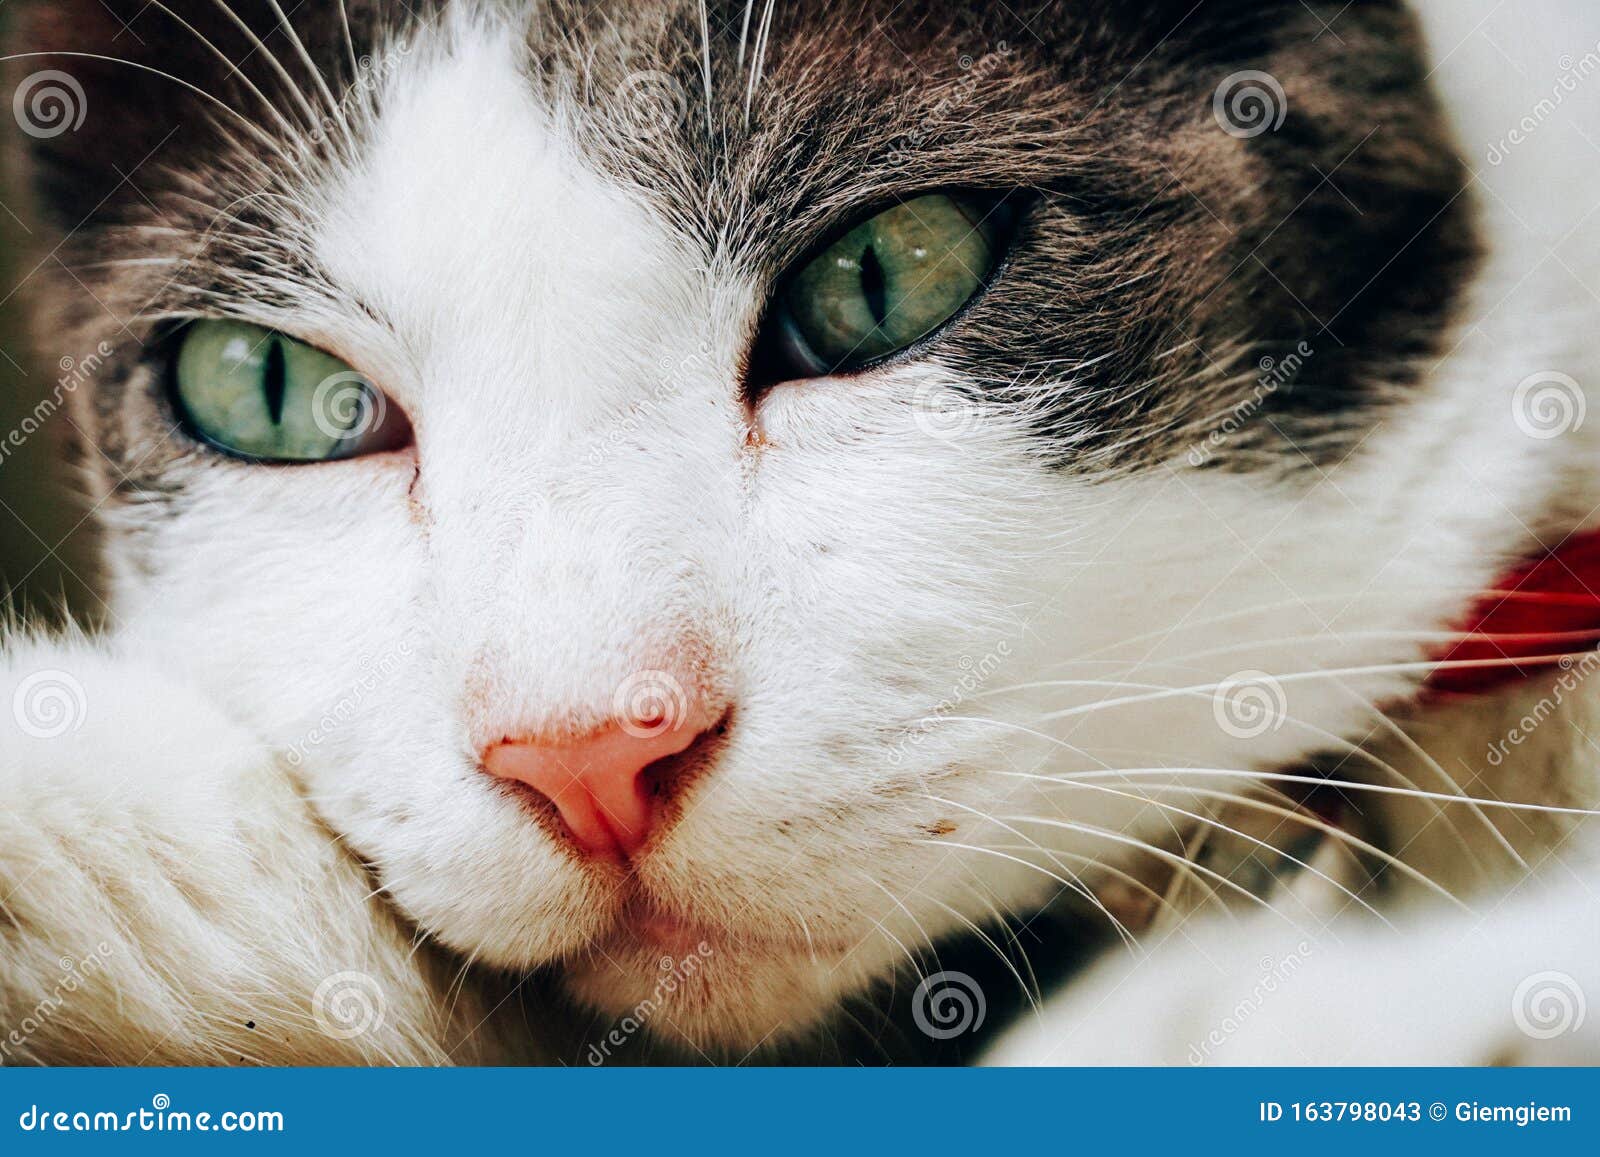 close up cute face cat background, the cat is spellbound